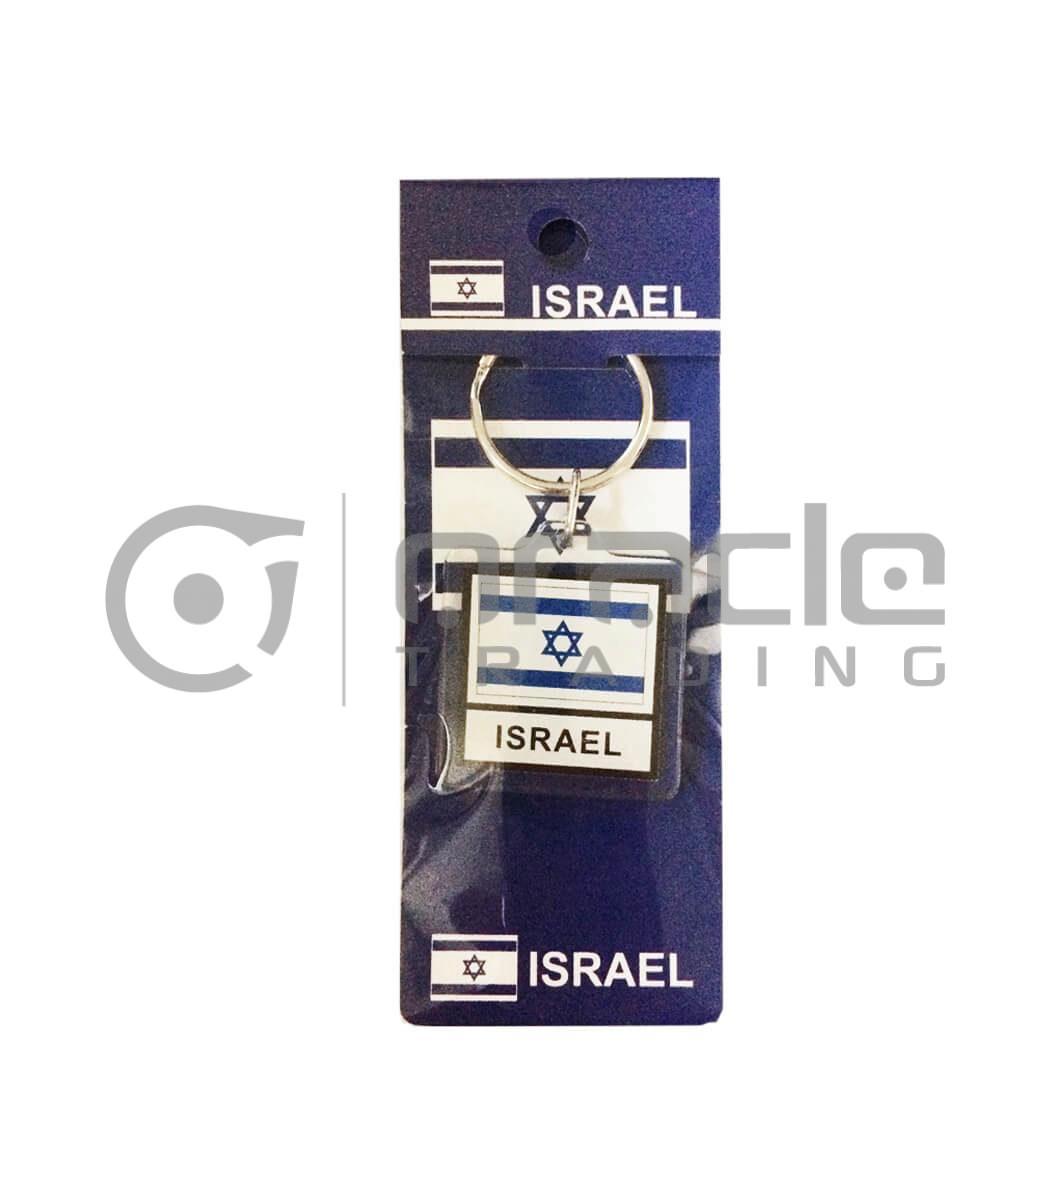 Israel Square Keychain 12-Pack